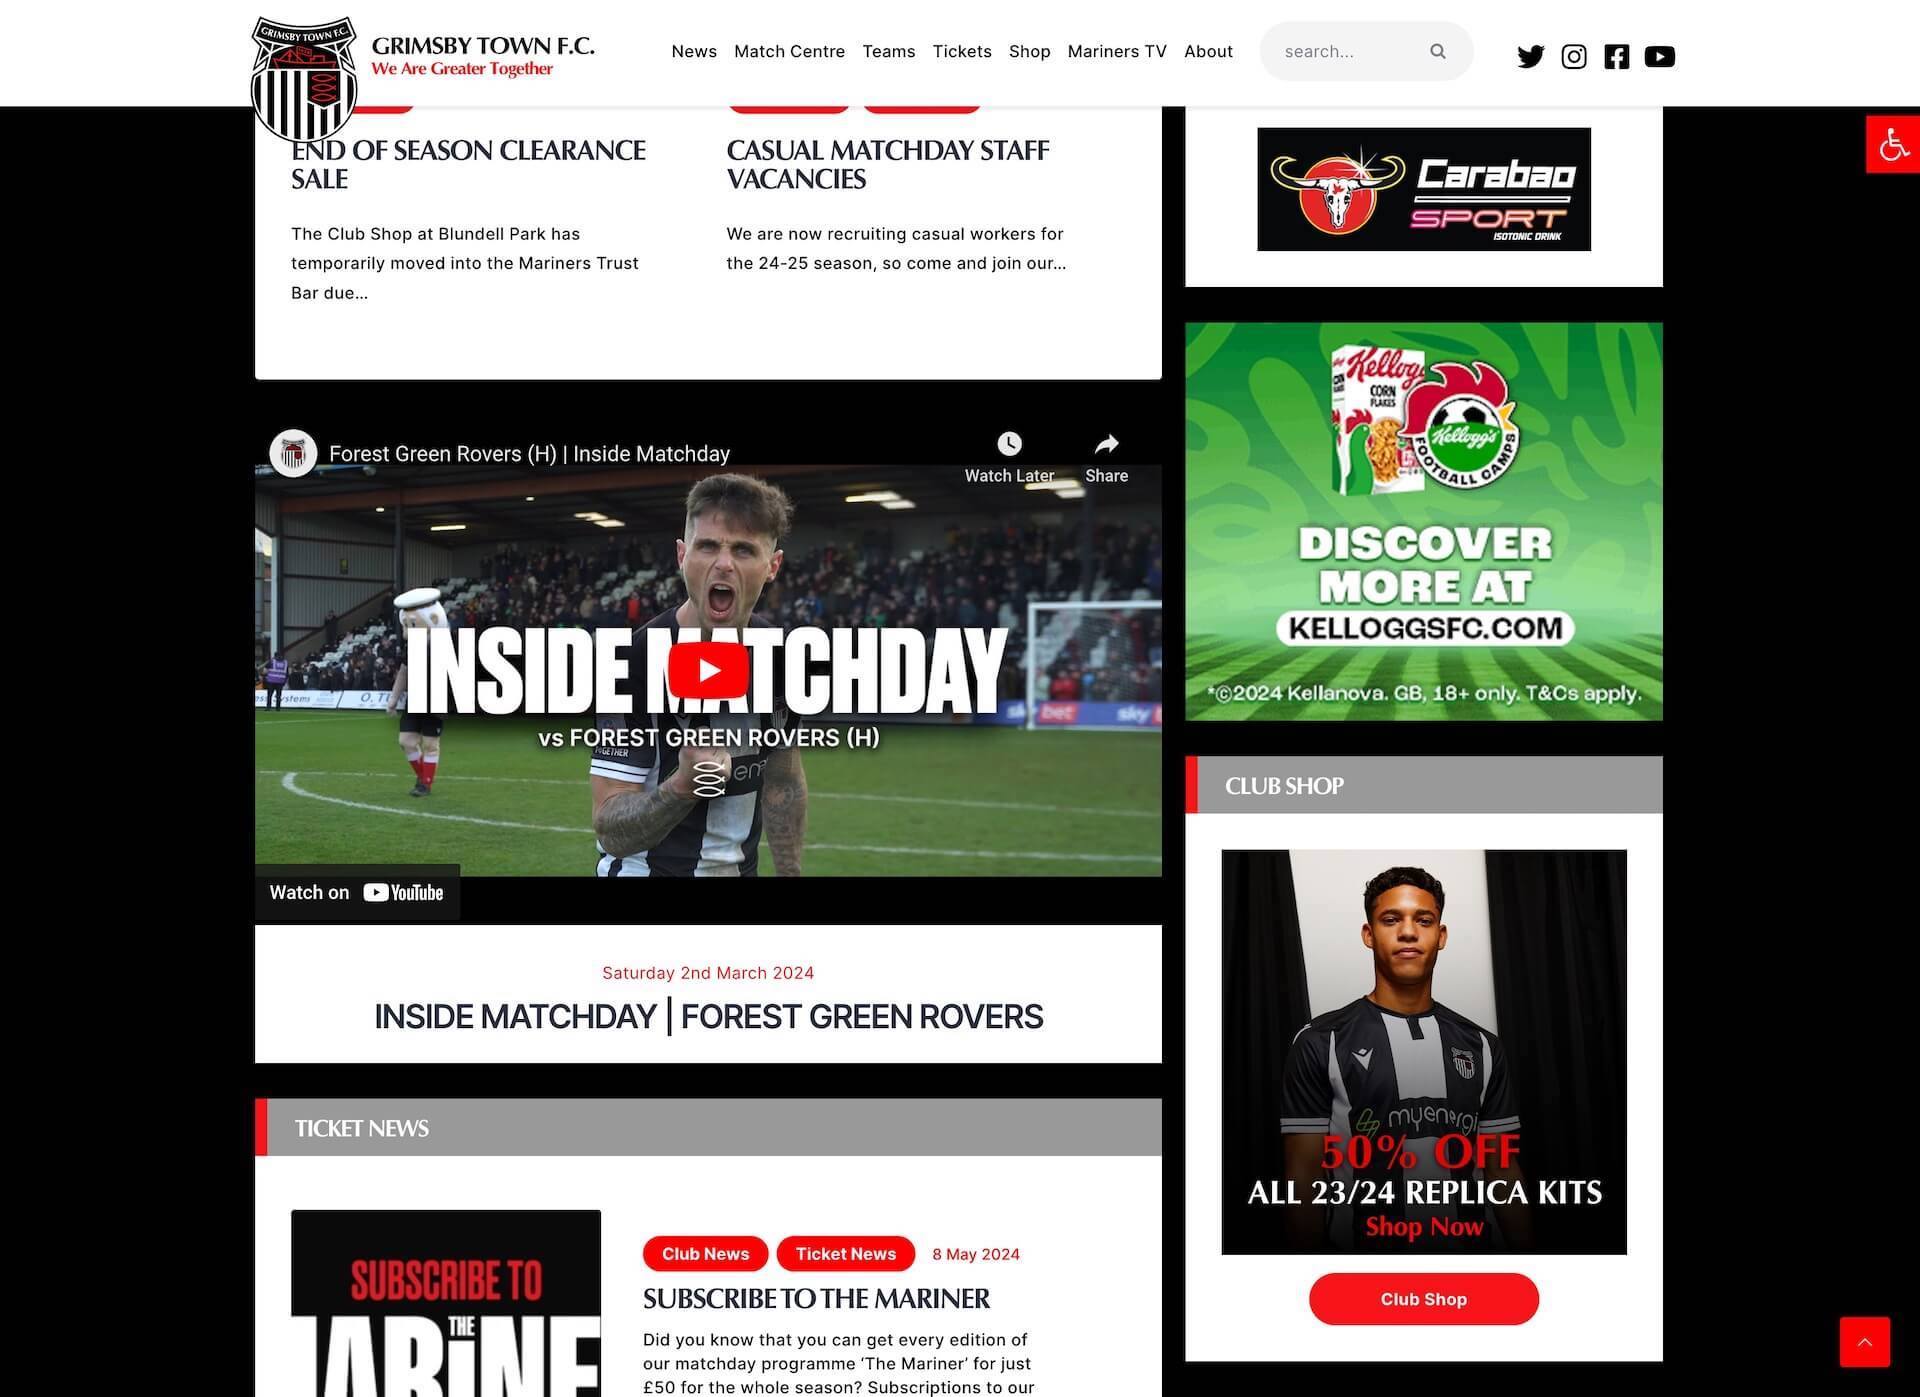 Website Banner showing a screen capture of the main Grimsby Town Football Club website